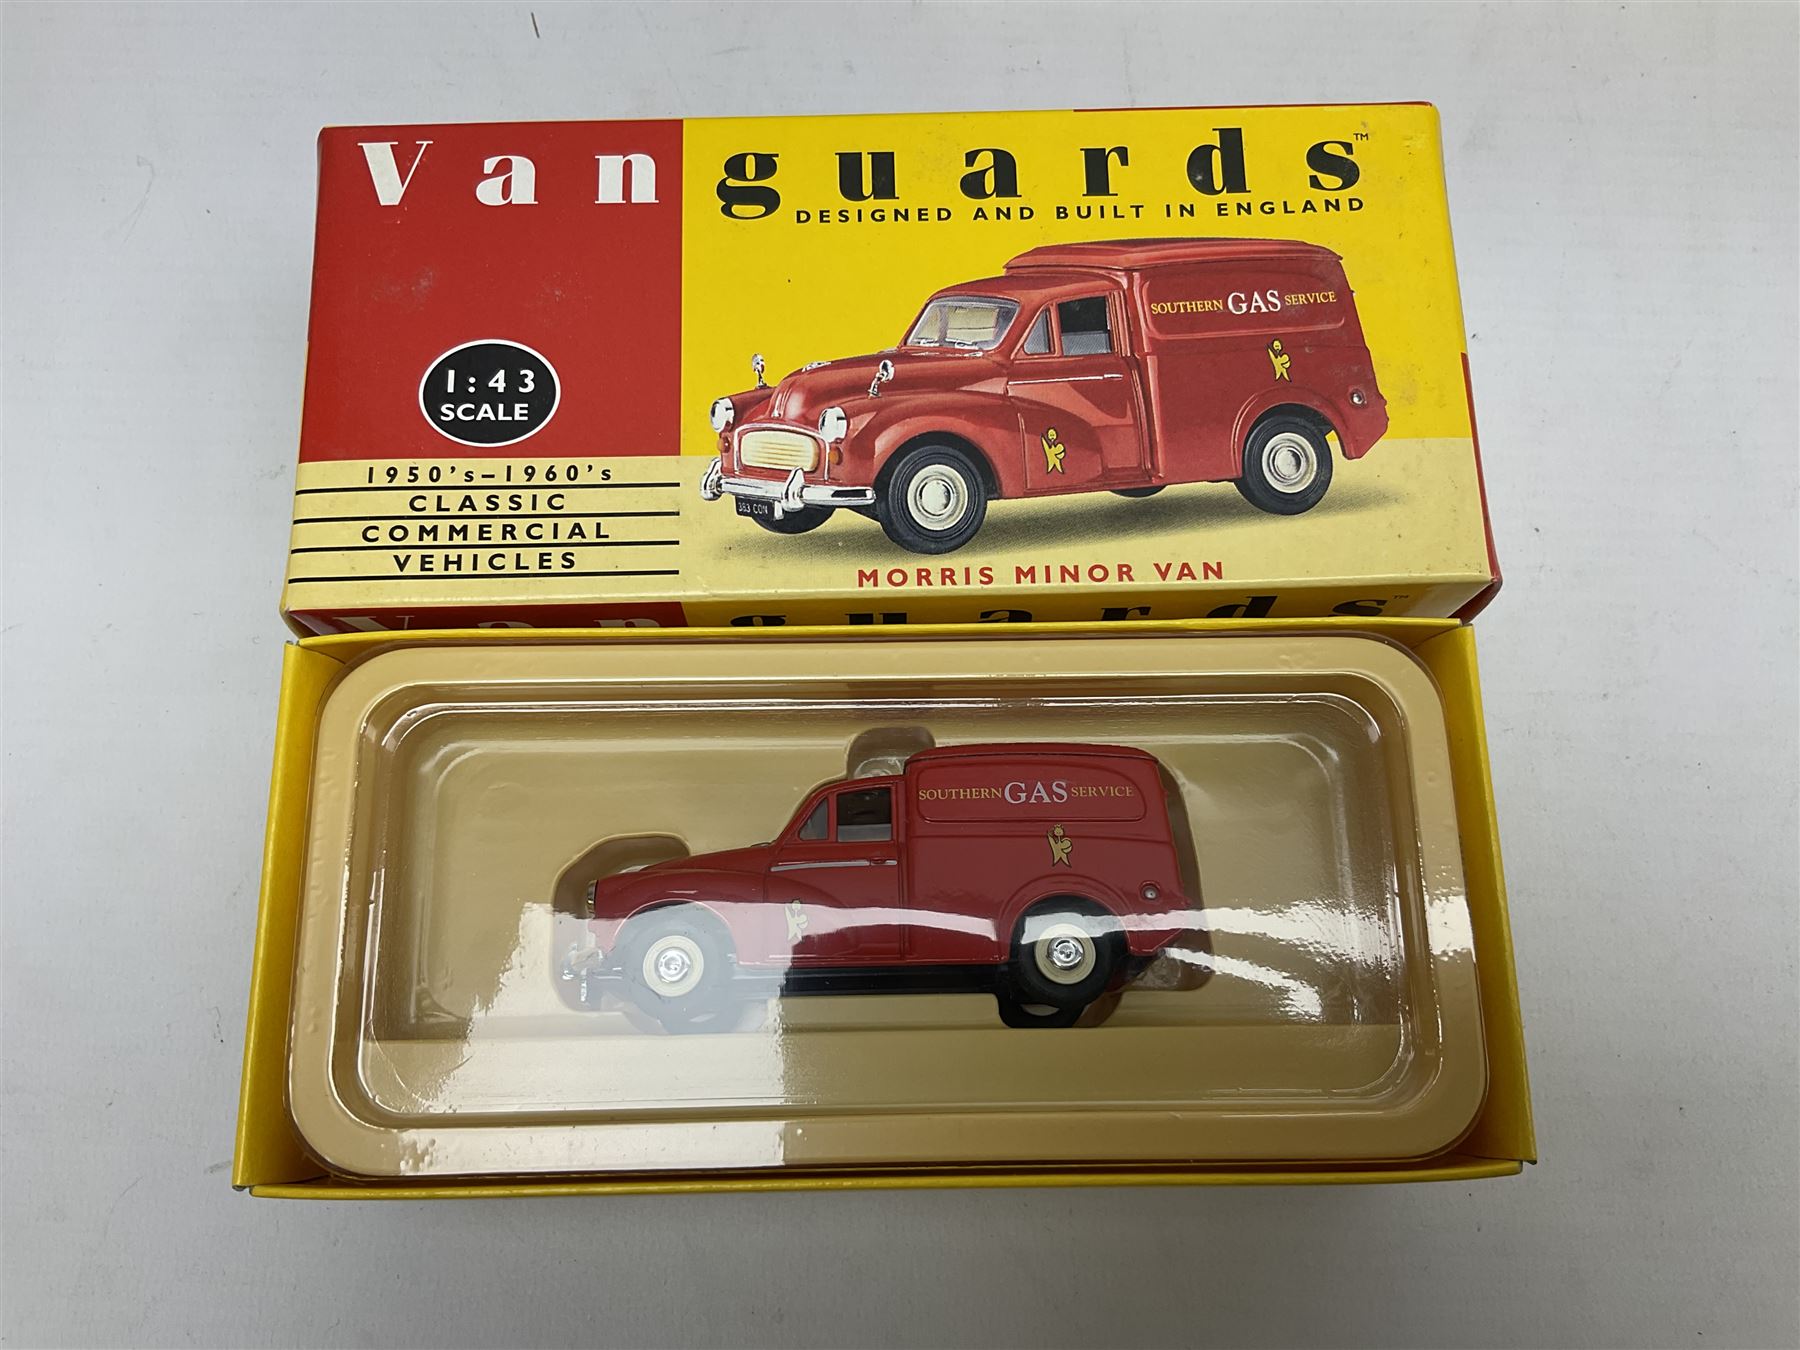 Sixteen Lledo Vanguards 1:43 scale 1950's-1960's Classic Commercial Vehicles die-cast models - Image 2 of 8